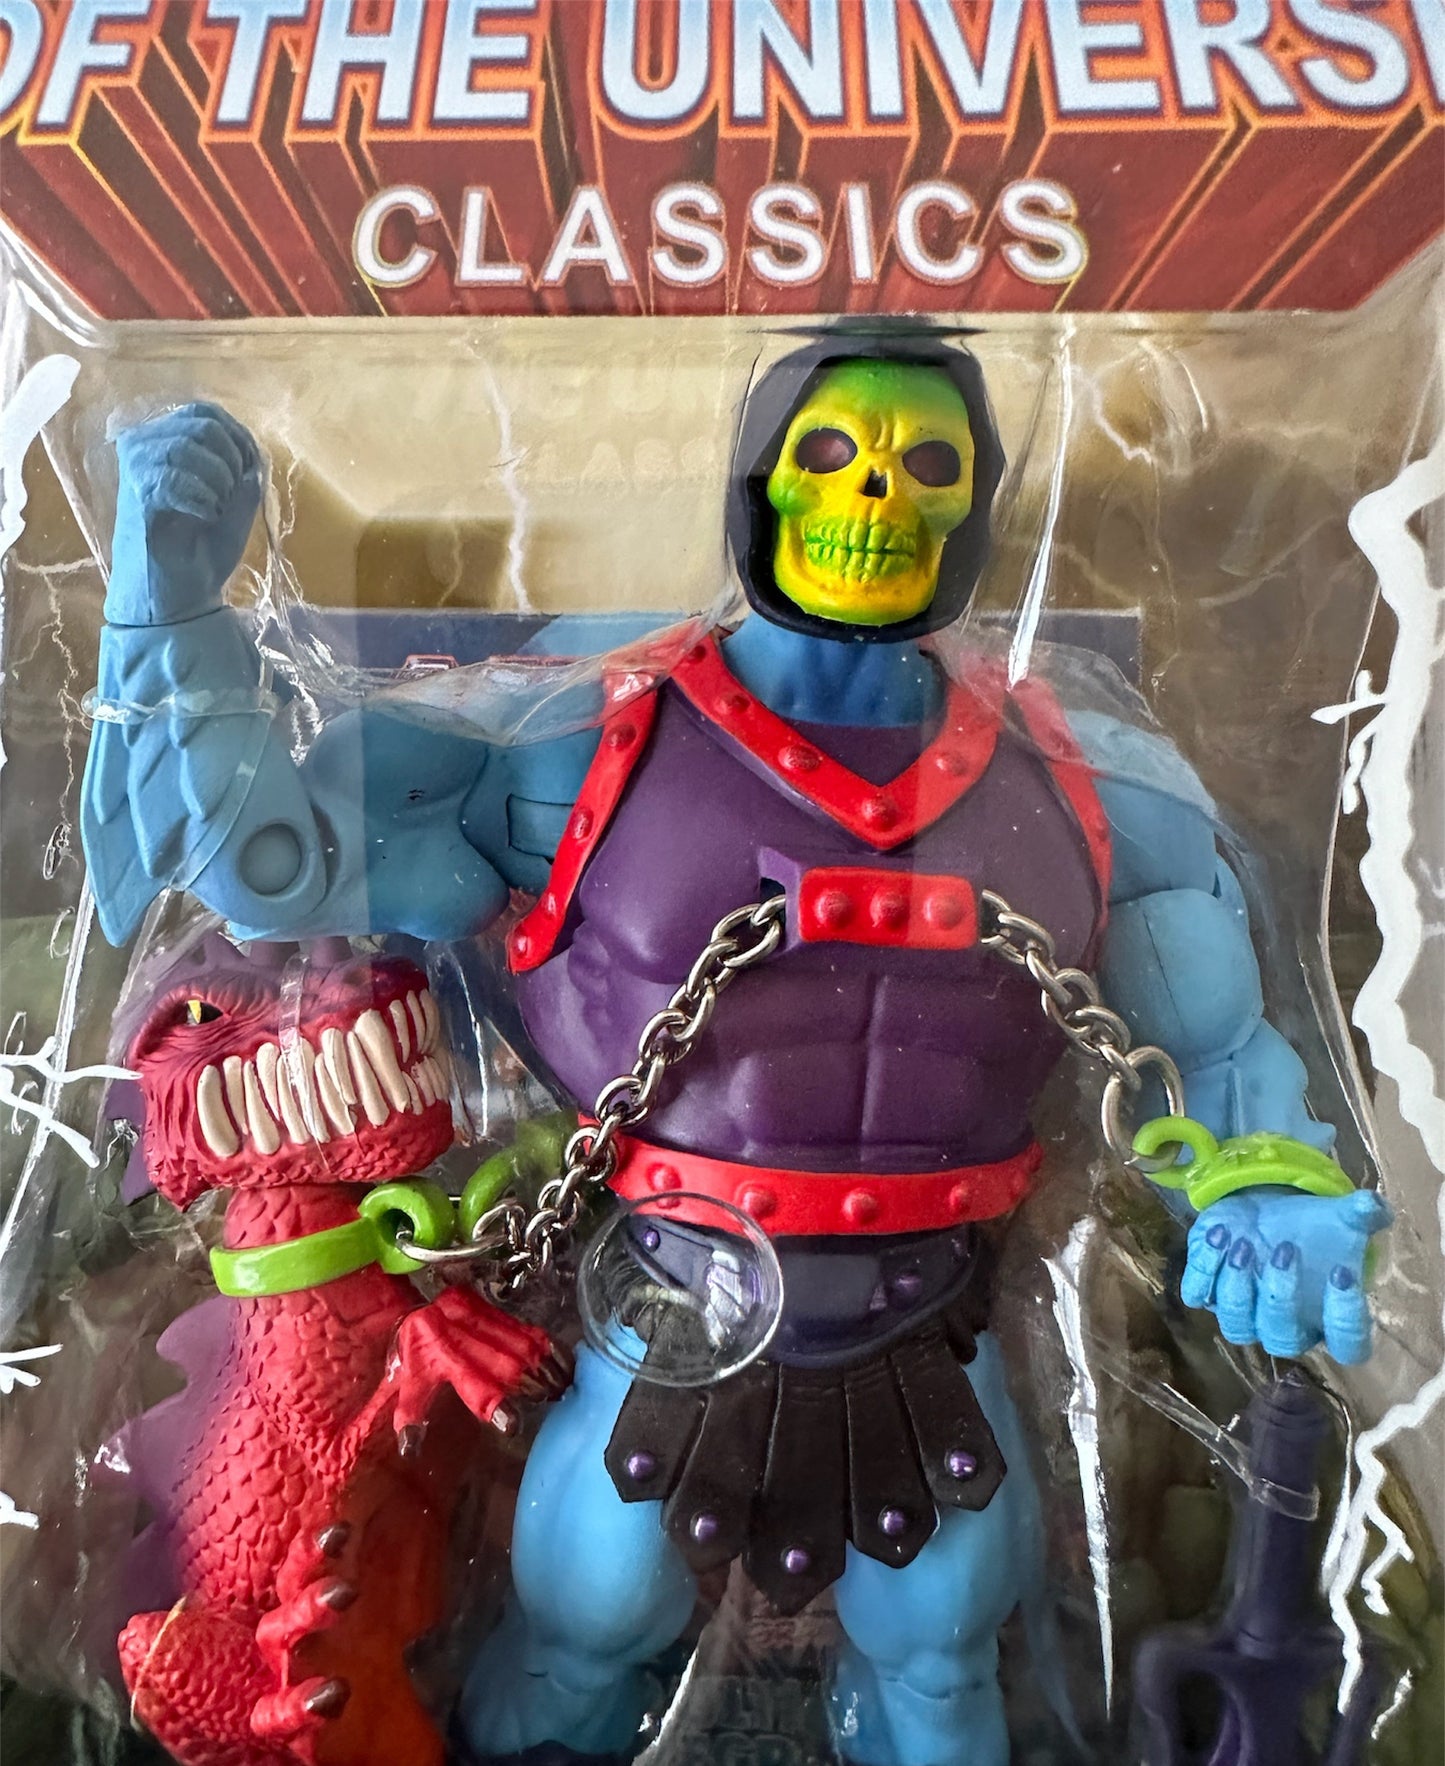 Vintage 2012 Mattel Masters Of The Universe Classics - 30th Anniversary 1982 to 2012 - Dragon Blaster Skeletor Action Figure - Brand New Factory Sealed Shop Stock Room Find